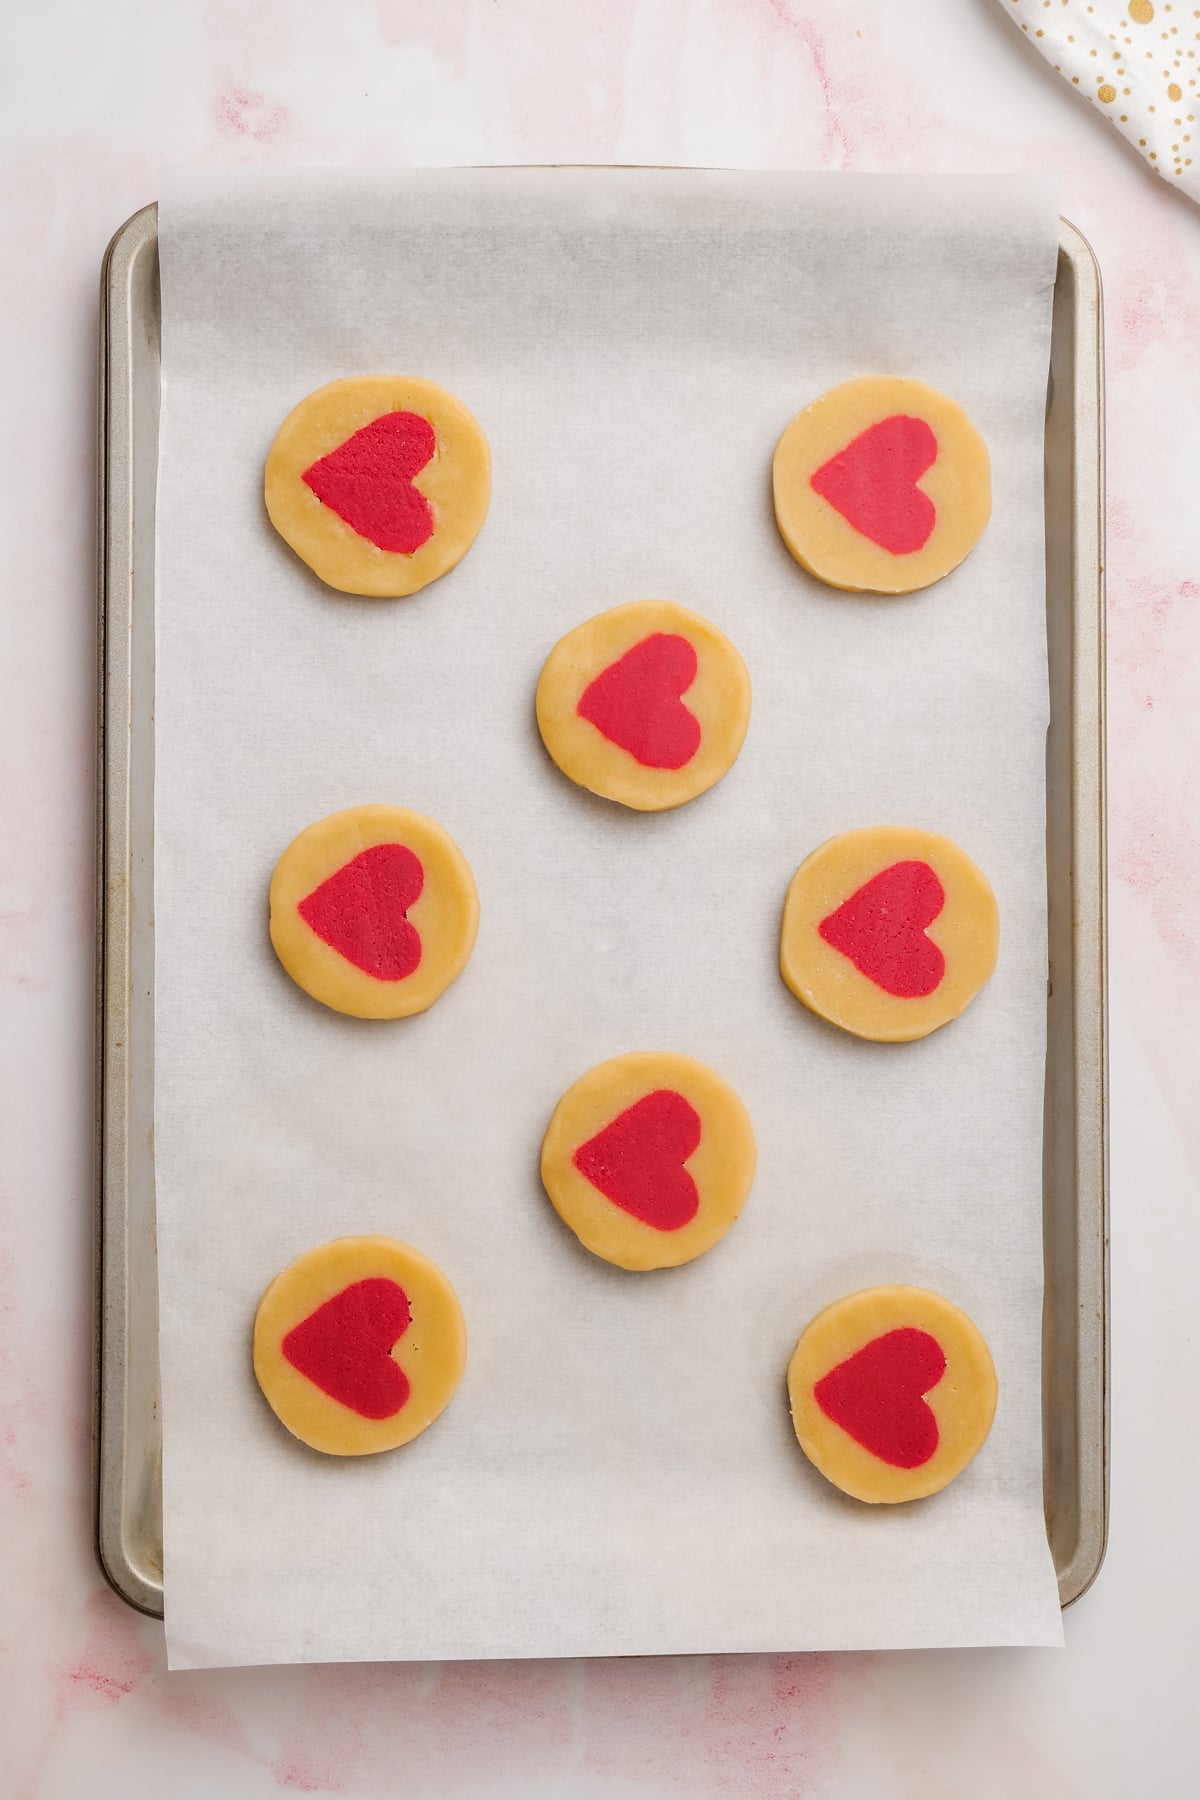 unbaked Valentine's Day cookies on baking sheet